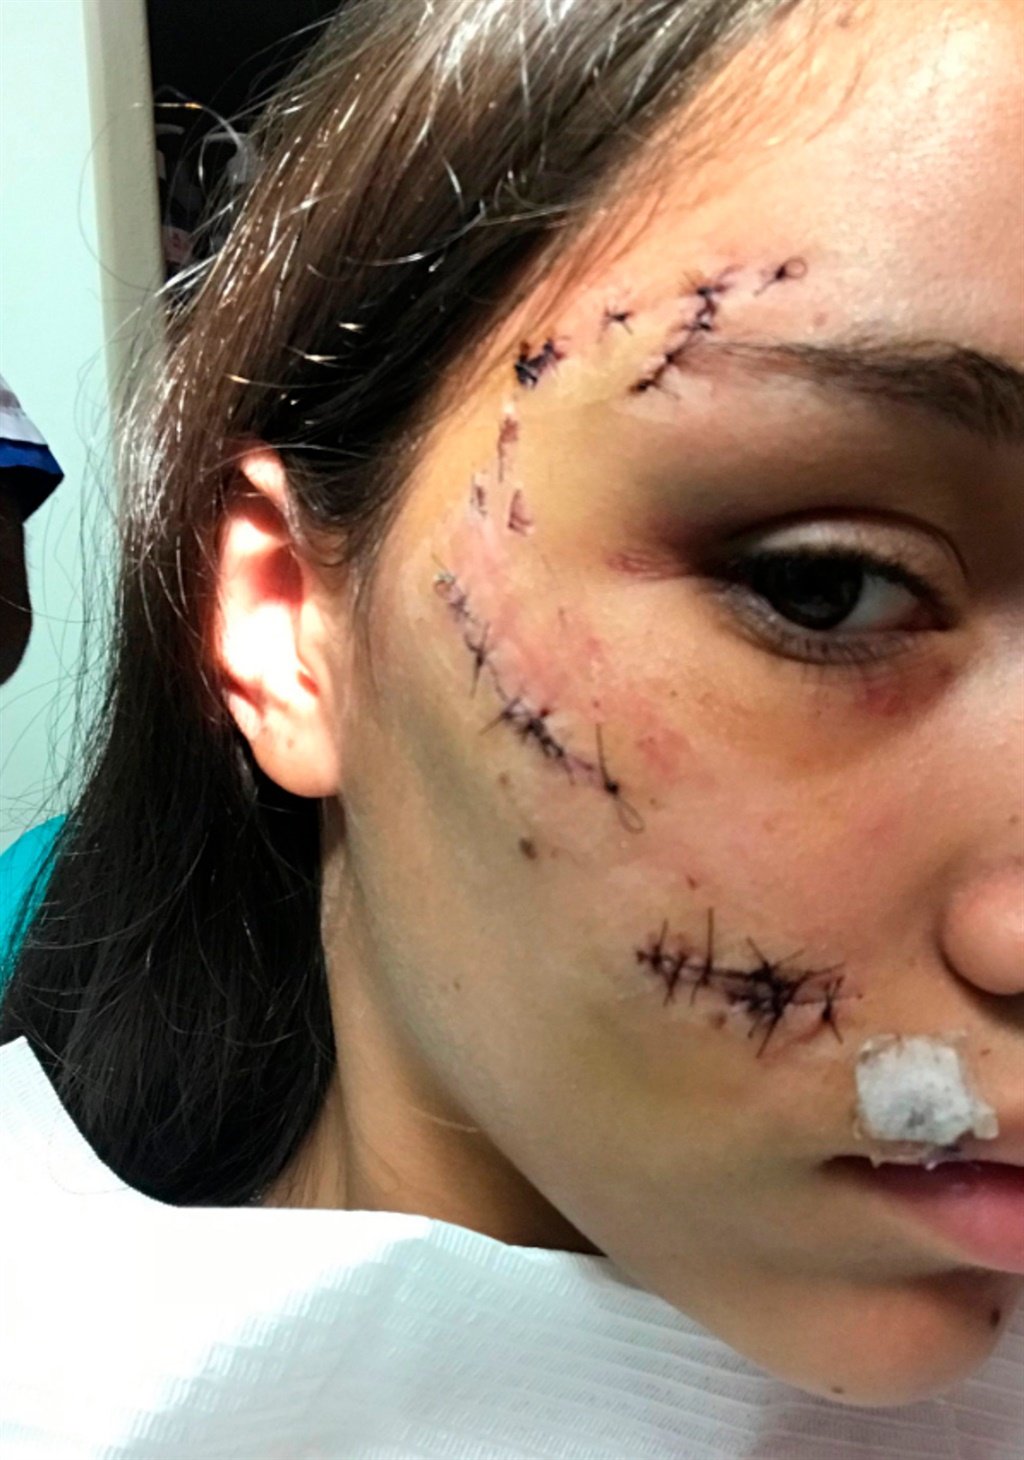 Pic shows: Lara Sanson was injured in the face.